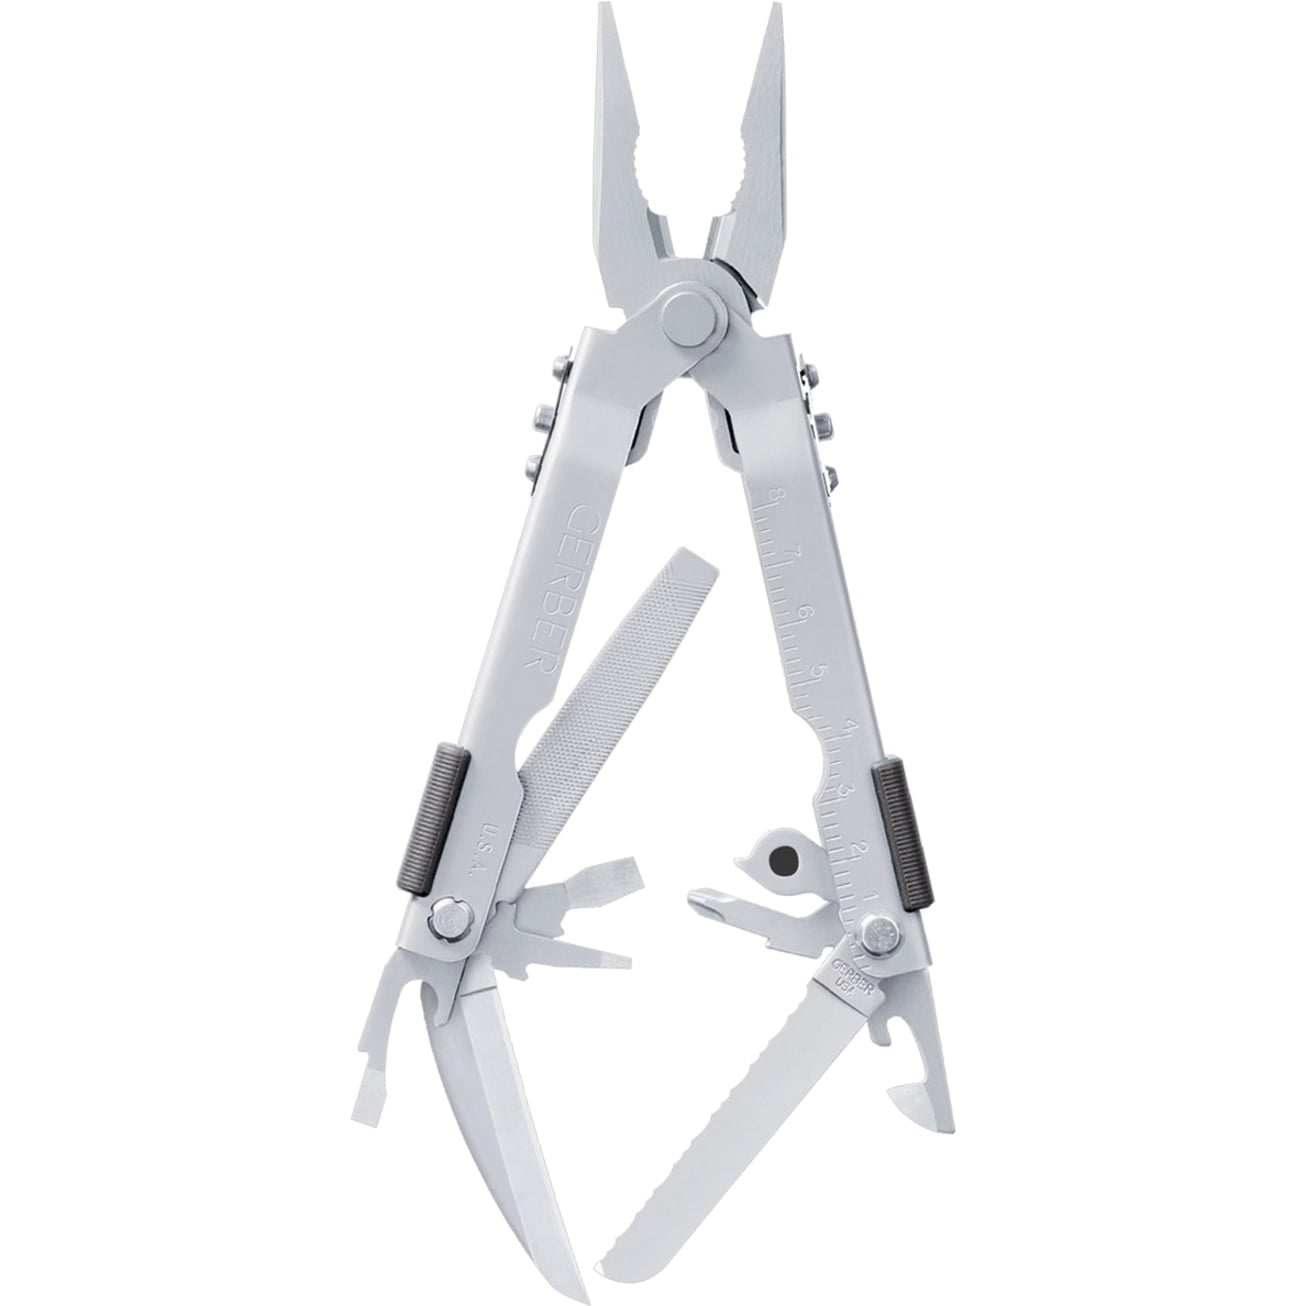 GERBER Multi-Plier® 600 needlenose pliers with crimper jaws US Made 